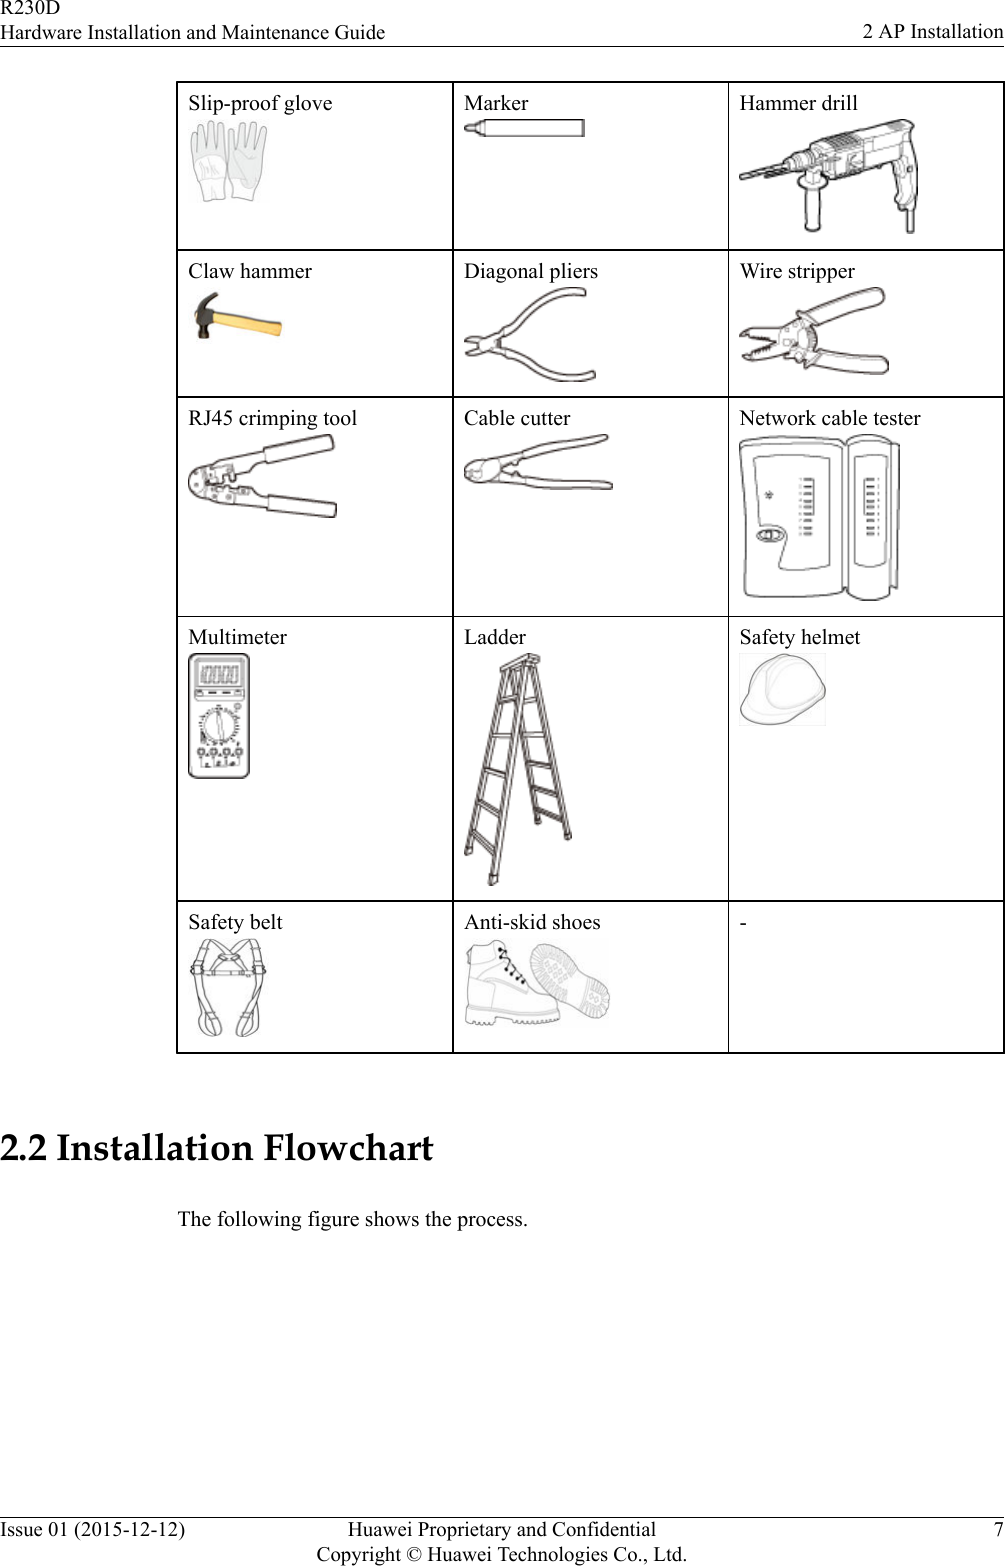 Slip-proof glove Marker Hammer drillClaw hammer Diagonal pliers Wire stripperRJ45 crimping tool Cable cutter Network cable testerMultimeter Ladder Safety helmetSafety belt Anti-skid shoes - 2.2 Installation FlowchartThe following figure shows the process.R230DHardware Installation and Maintenance Guide 2 AP InstallationIssue 01 (2015-12-12) Huawei Proprietary and ConfidentialCopyright © Huawei Technologies Co., Ltd.7